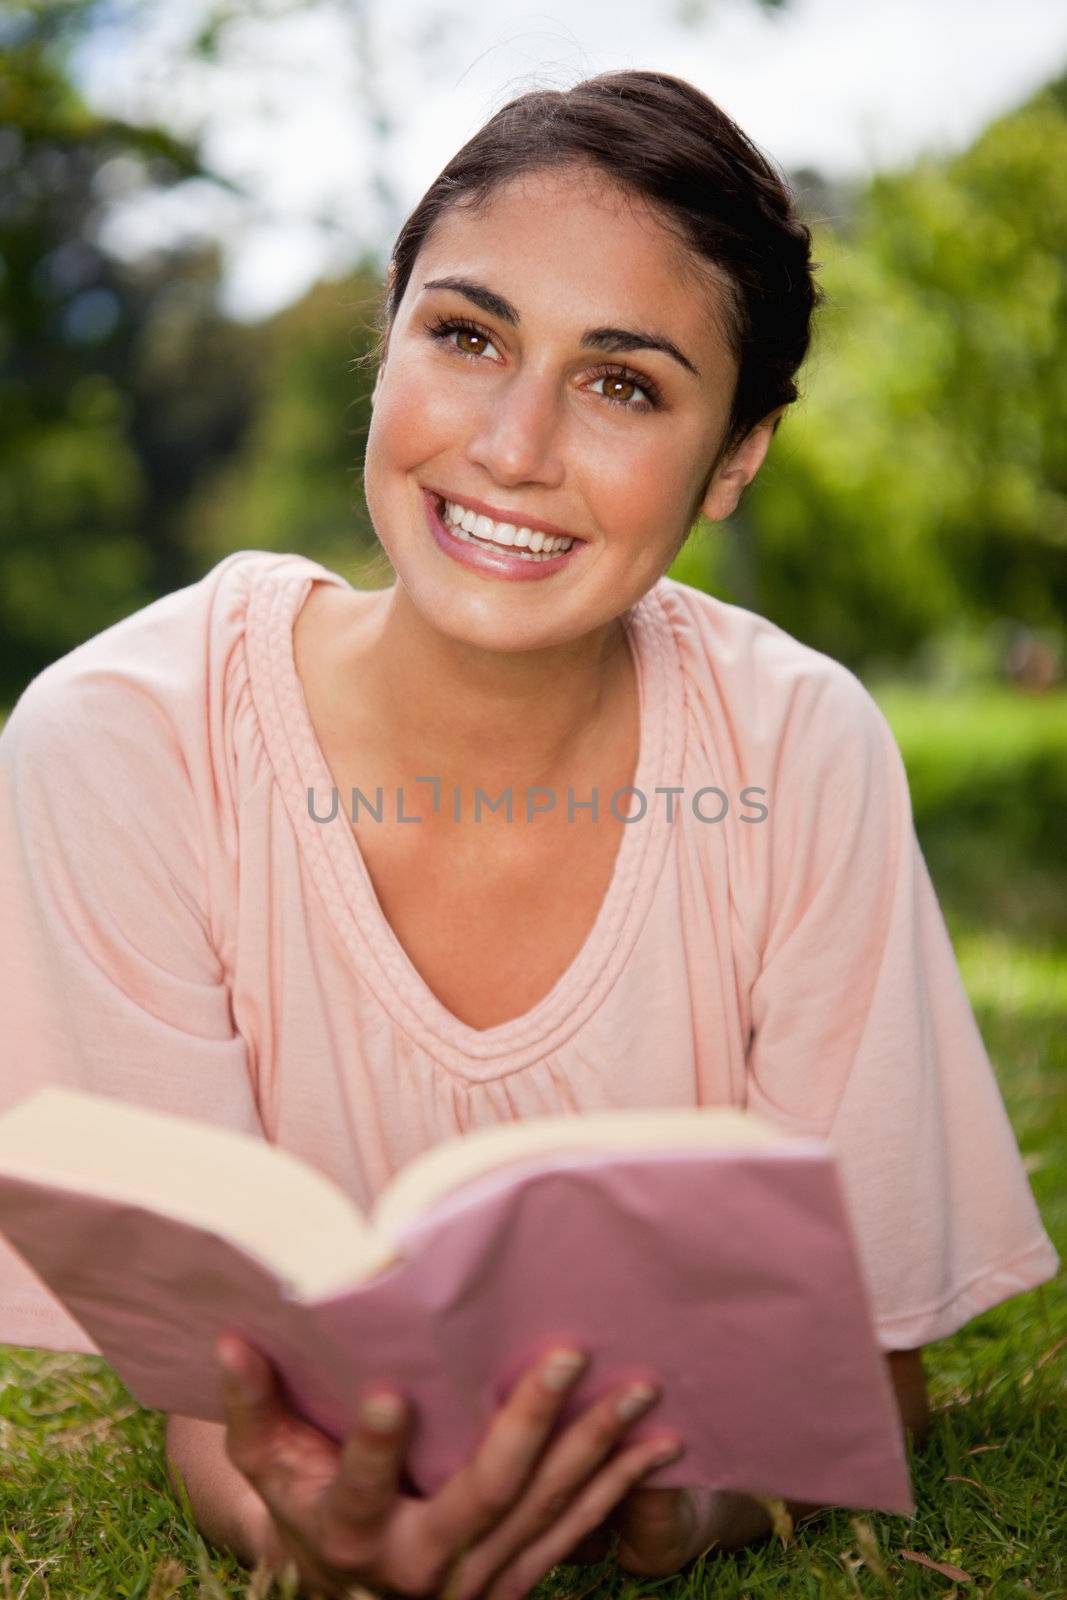 Woman looks towards to the sky while she reads a books as she is lying prone on grass